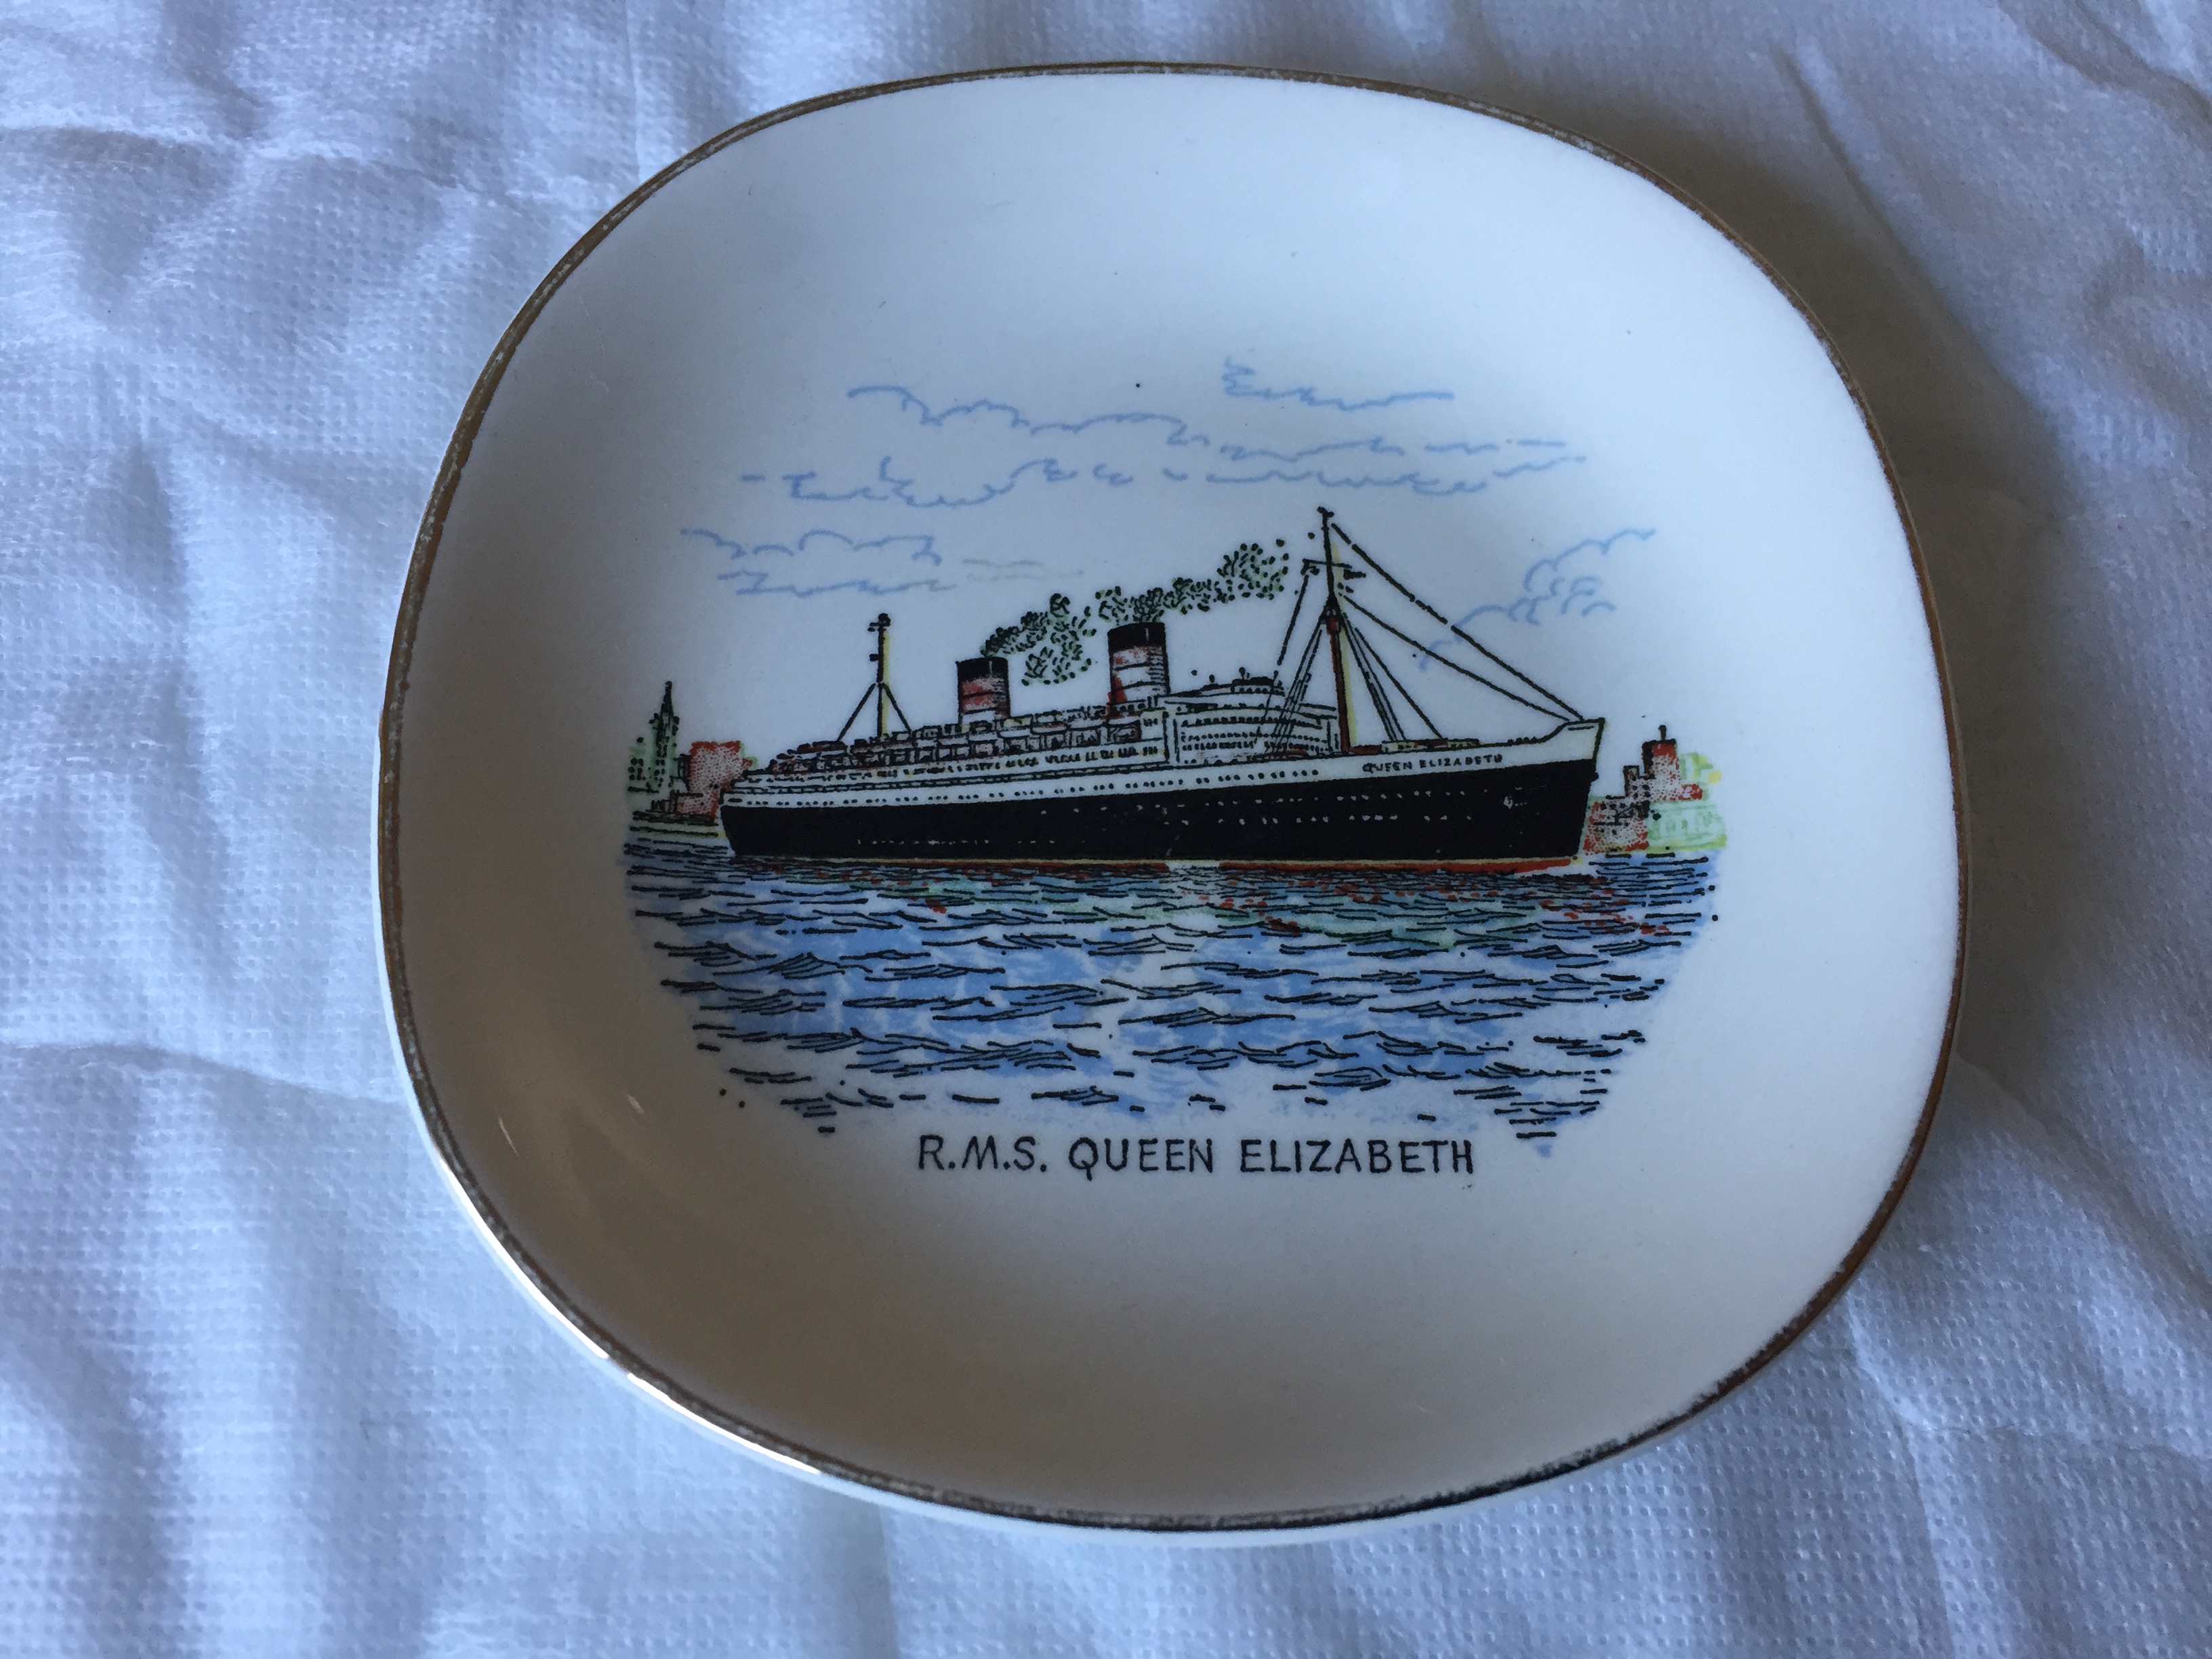 EARLY DECORATIVE CHINA DISH FROM THE LINER THE RMS QUEEN ELIZABETH